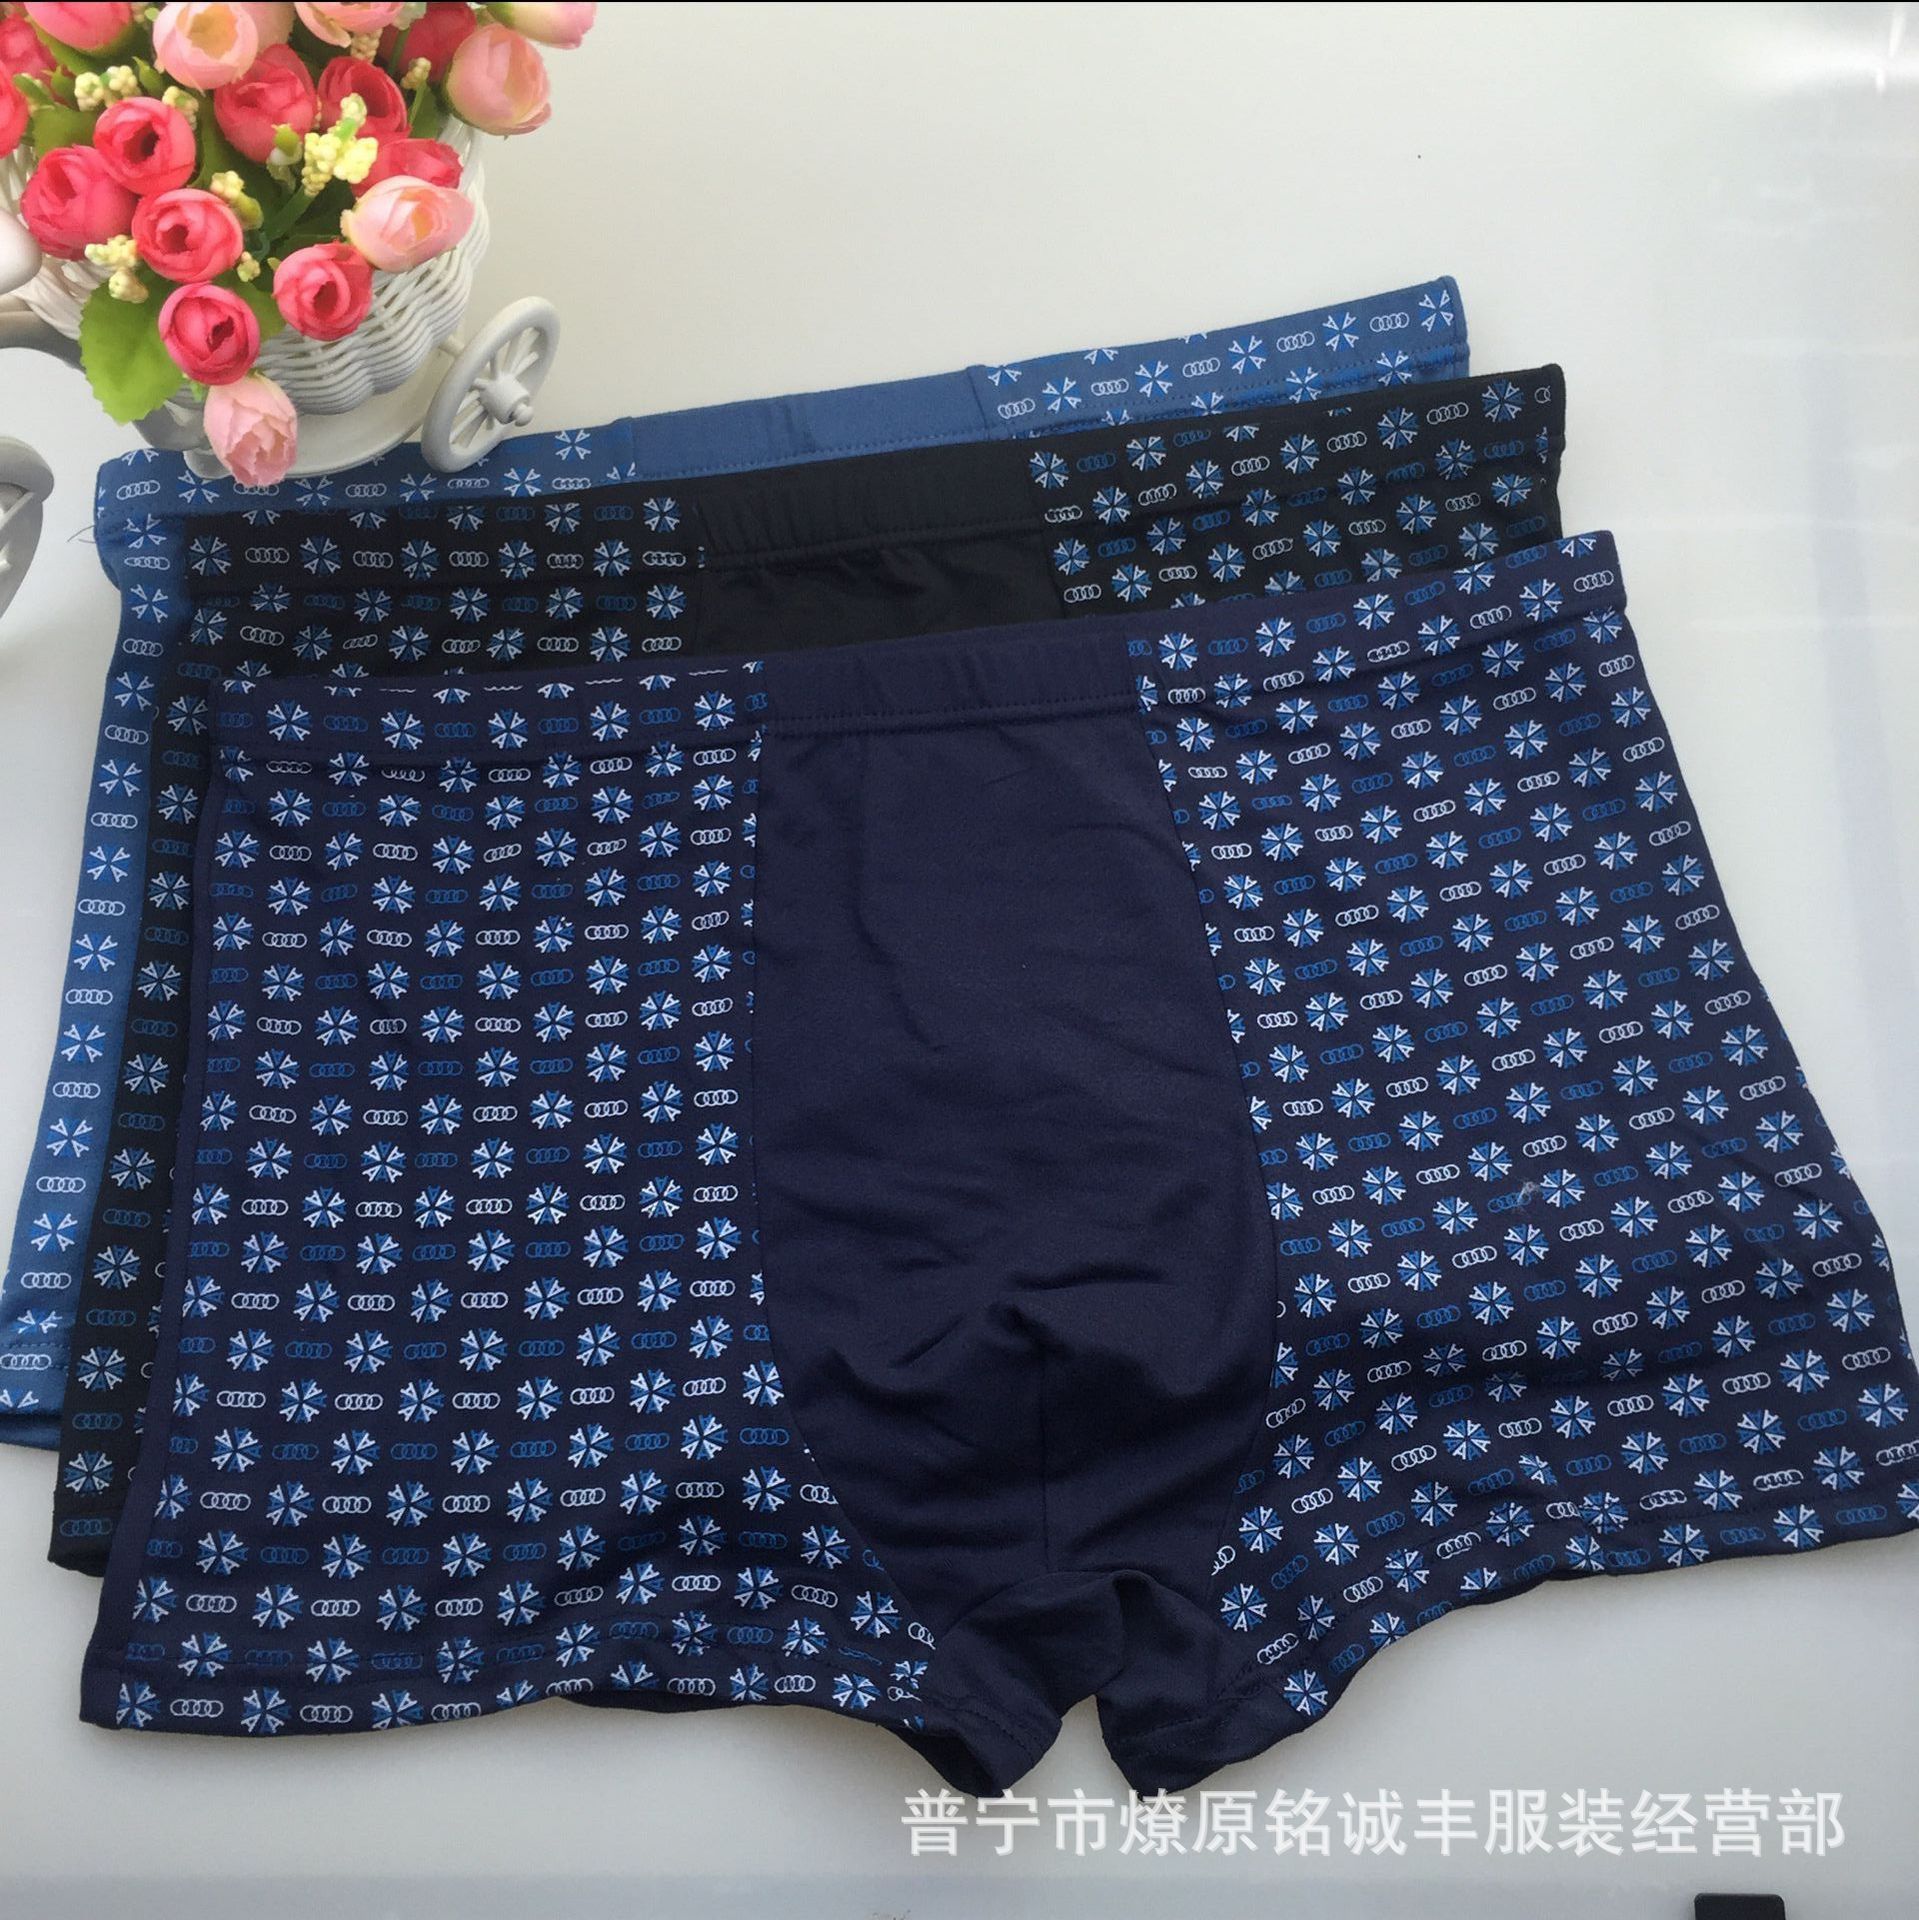 man Boxer Stall goods Five yuan Mode A variety of Mixed batch Manufactor Source of goods soft printing . shorts